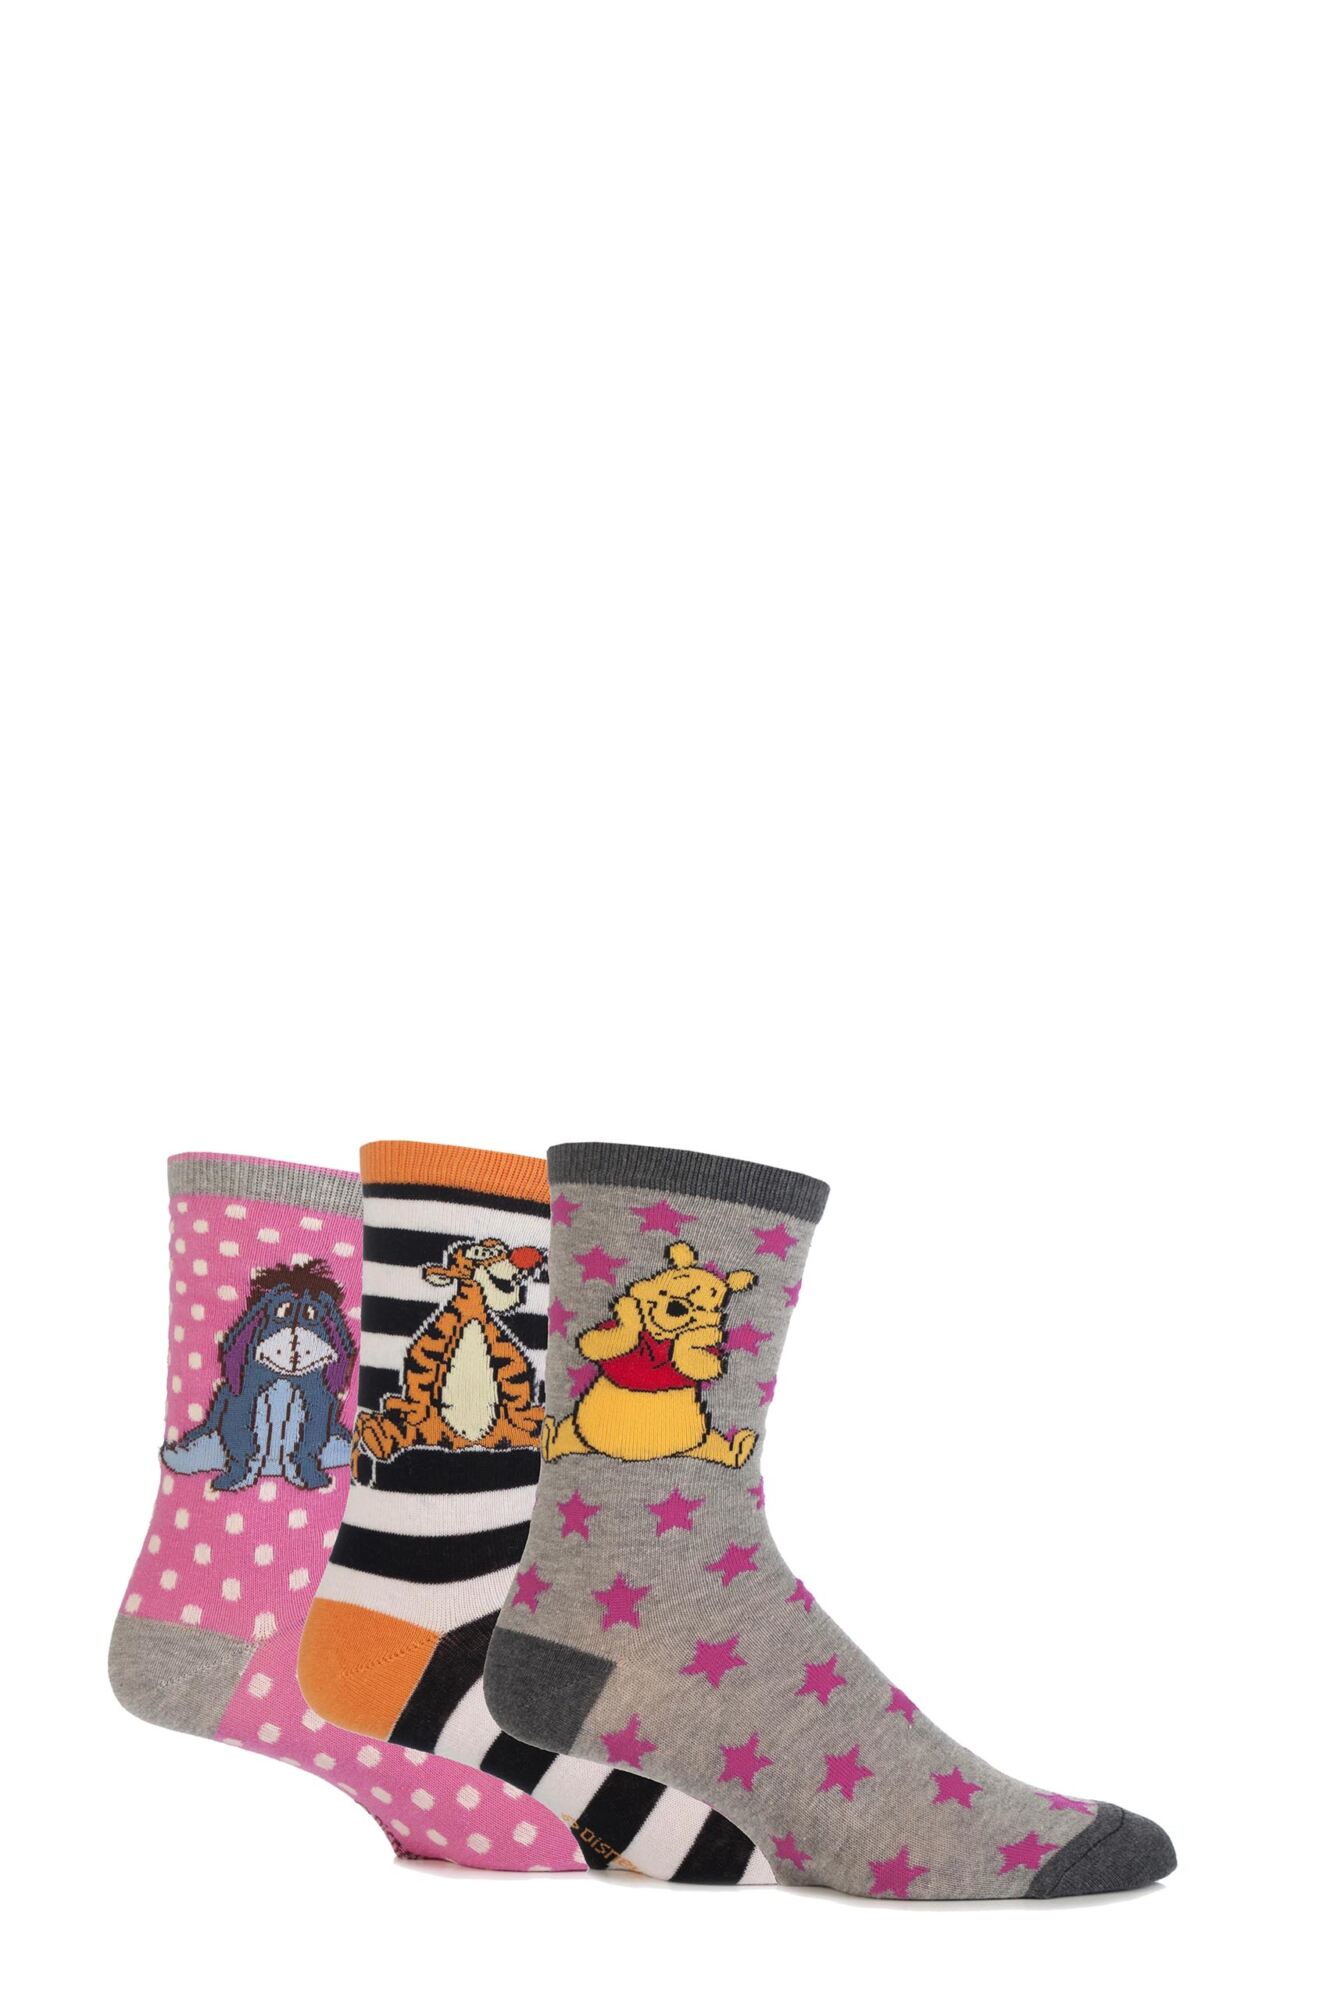 3 Pair Winnie The Pooh and Friends Socks Girls - Film & TV Characters